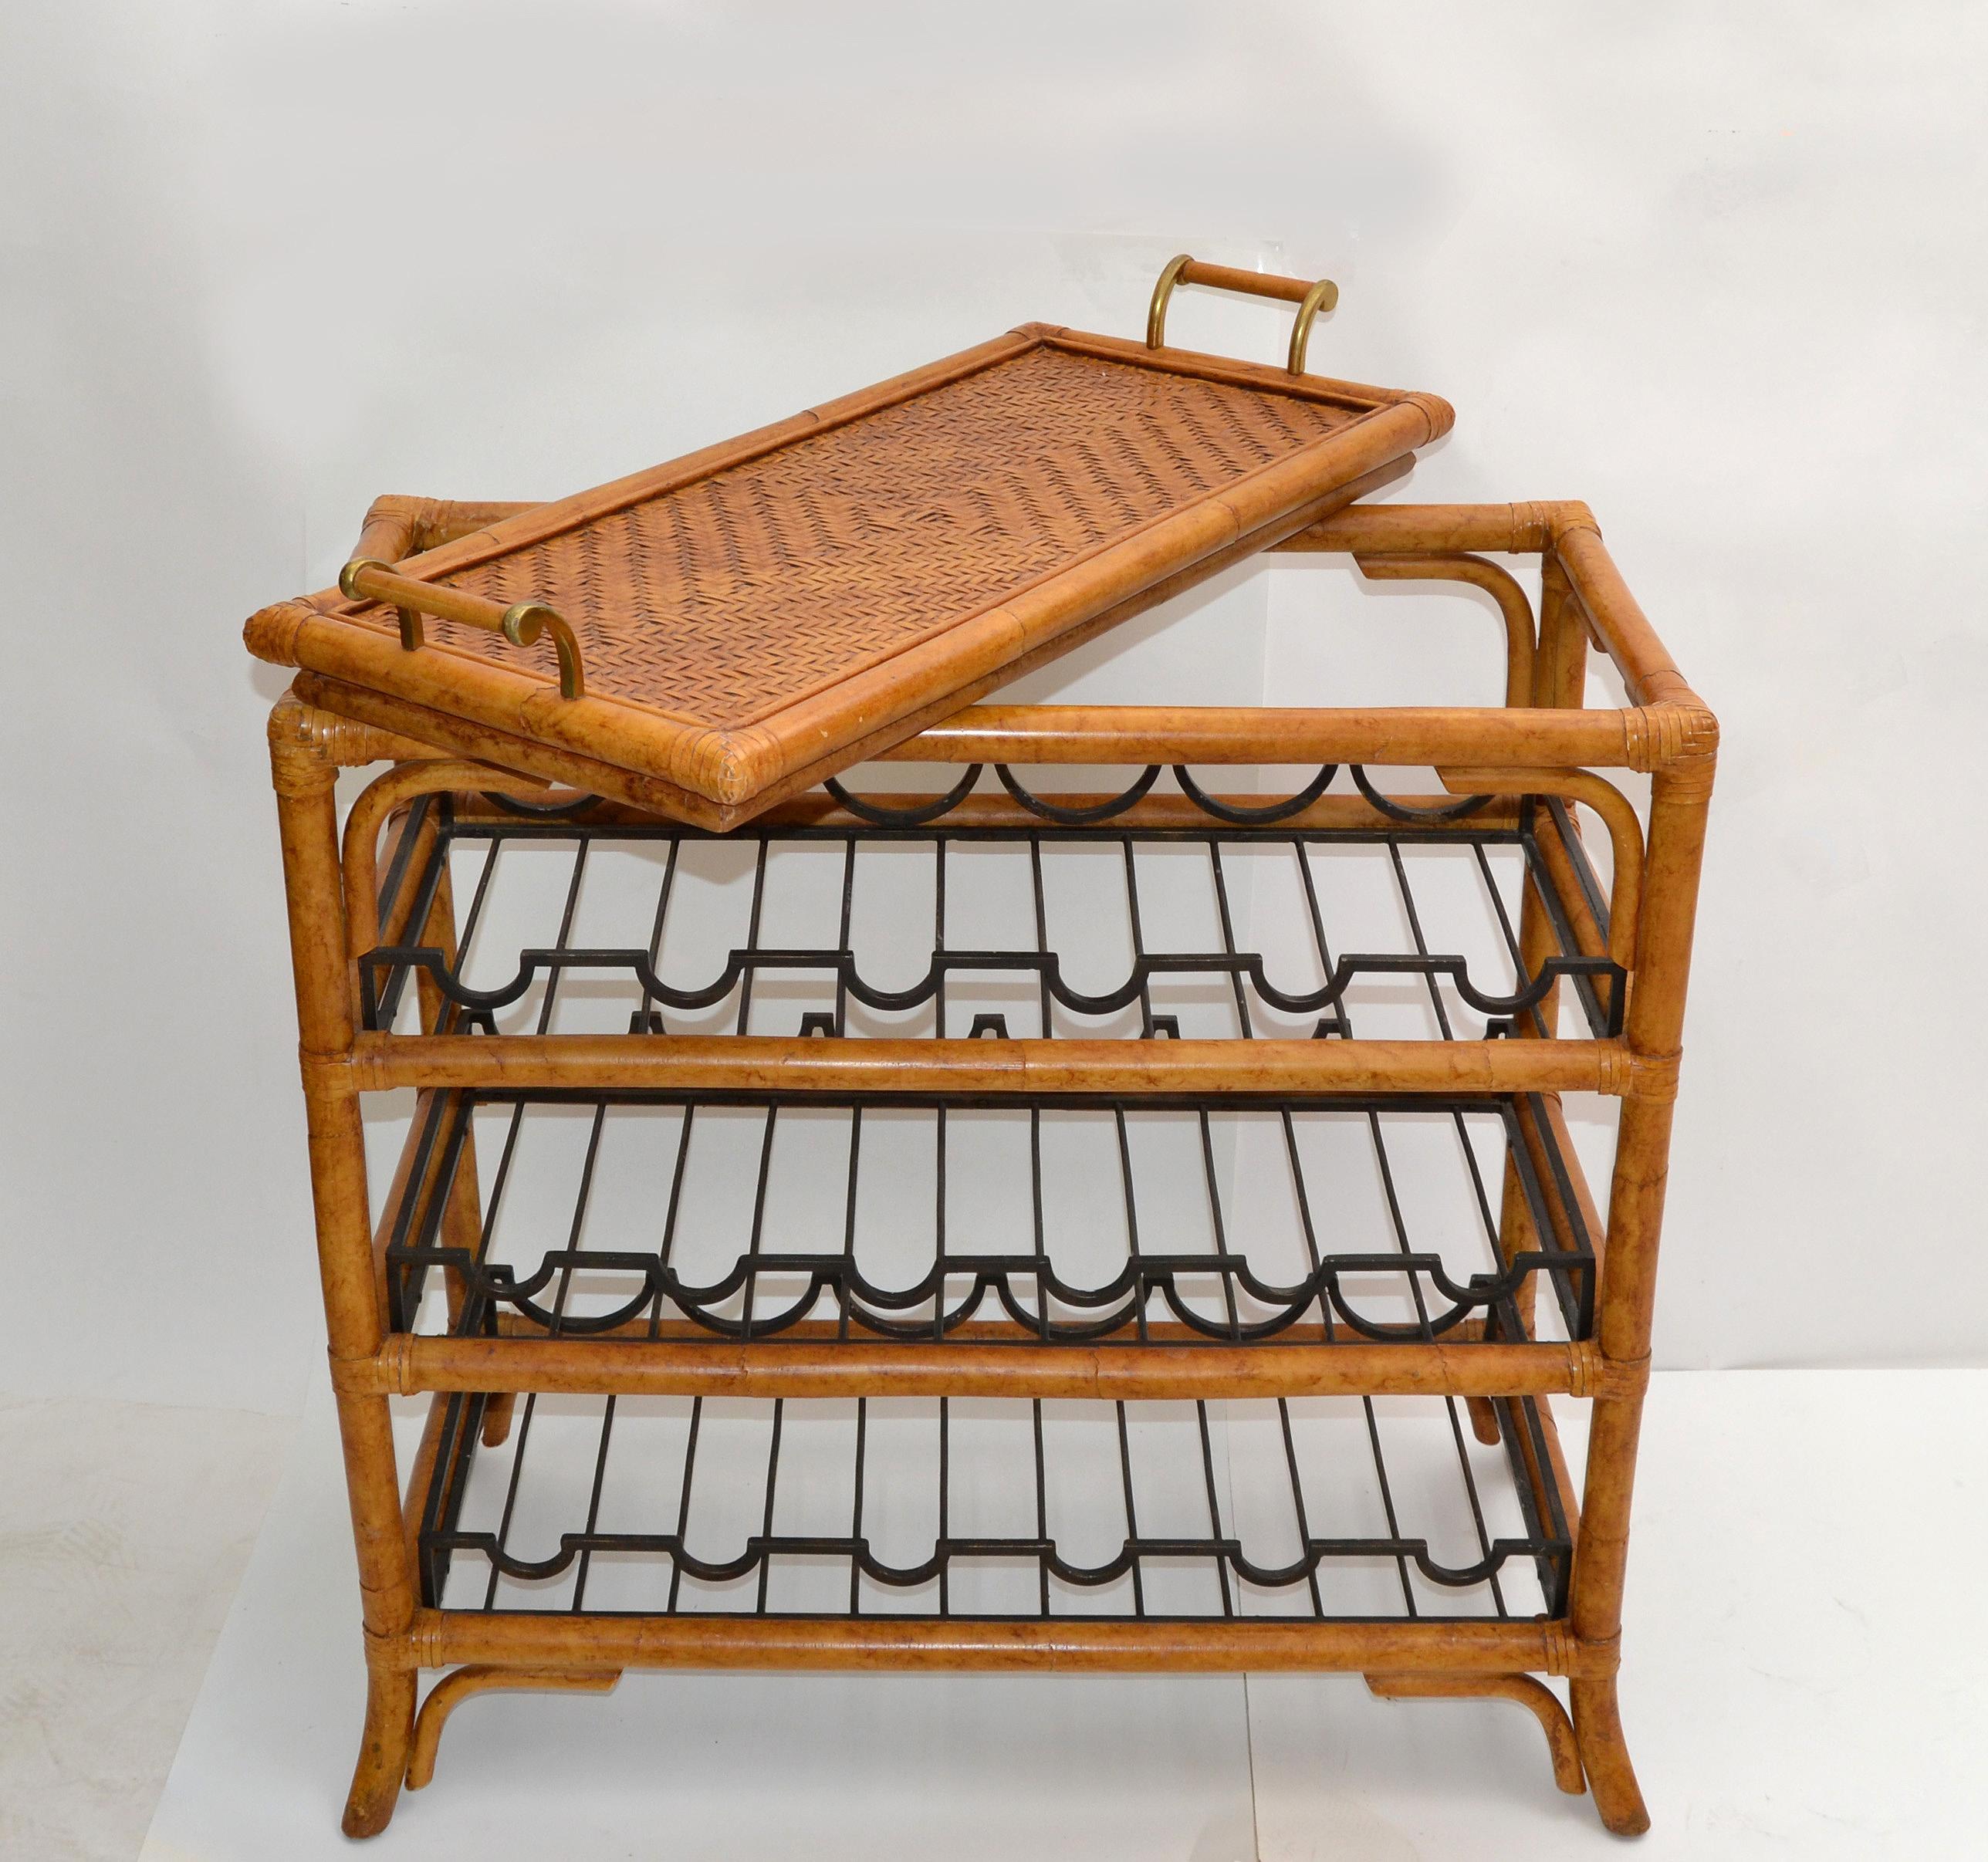 Mid-Century Modern Boho Chic rectangular bamboo stand with wrought iron bottle rack and comes with a serving tray. Tray measures: Height: 4 inches, Depth: 13.25 inches, Length: 31.5 inches.
The handles have brass detail.
The wine stand can hold up